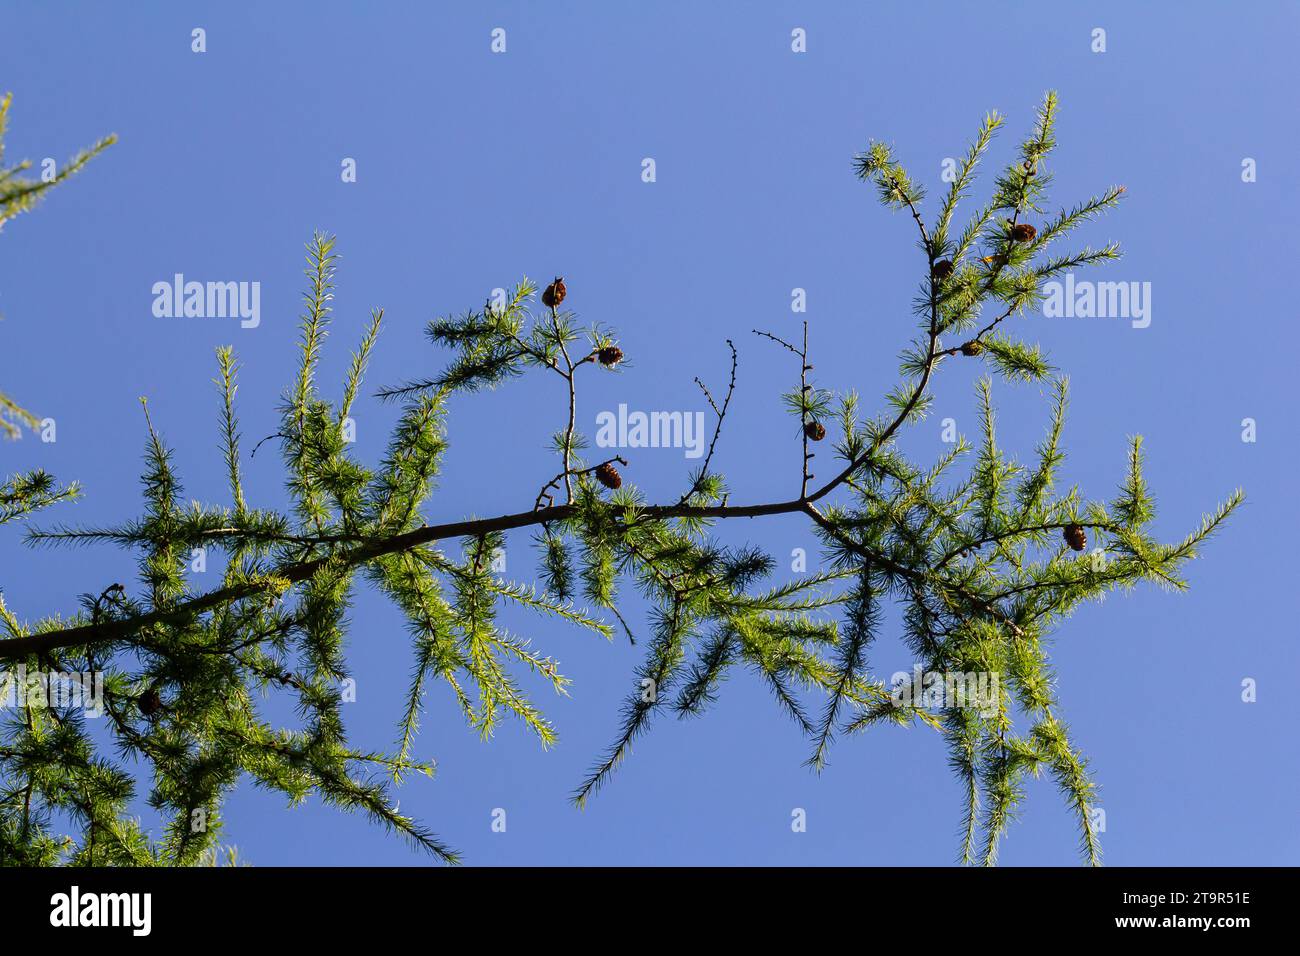 a larch branch with bright green spring games, against a blue sky background. Stock Photo